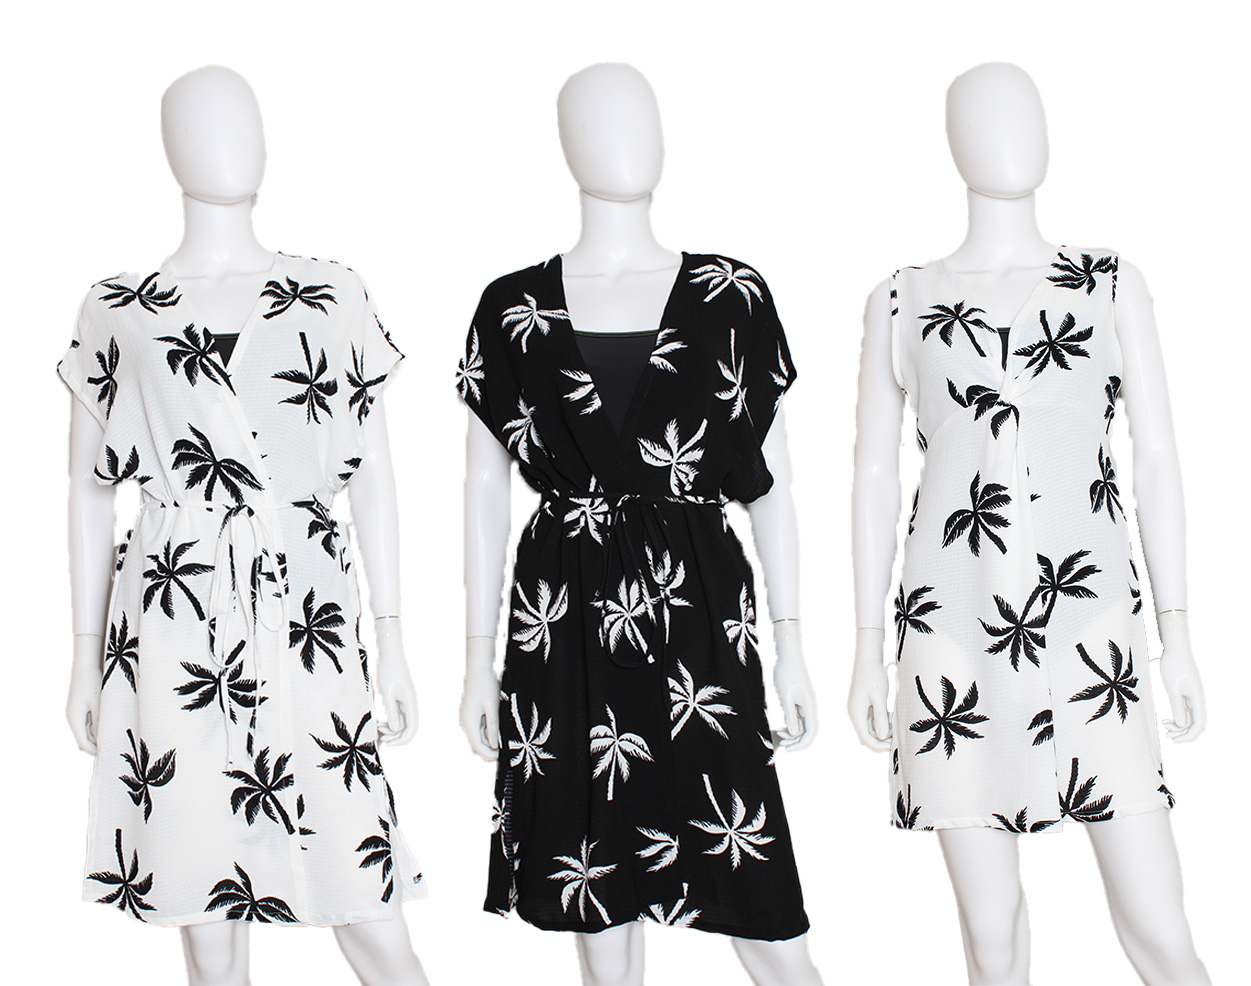 Women's Fashion Printed Pullover Sheer Cover-Ups w/ Tropical Palm Tree Print - Black & White -  Size